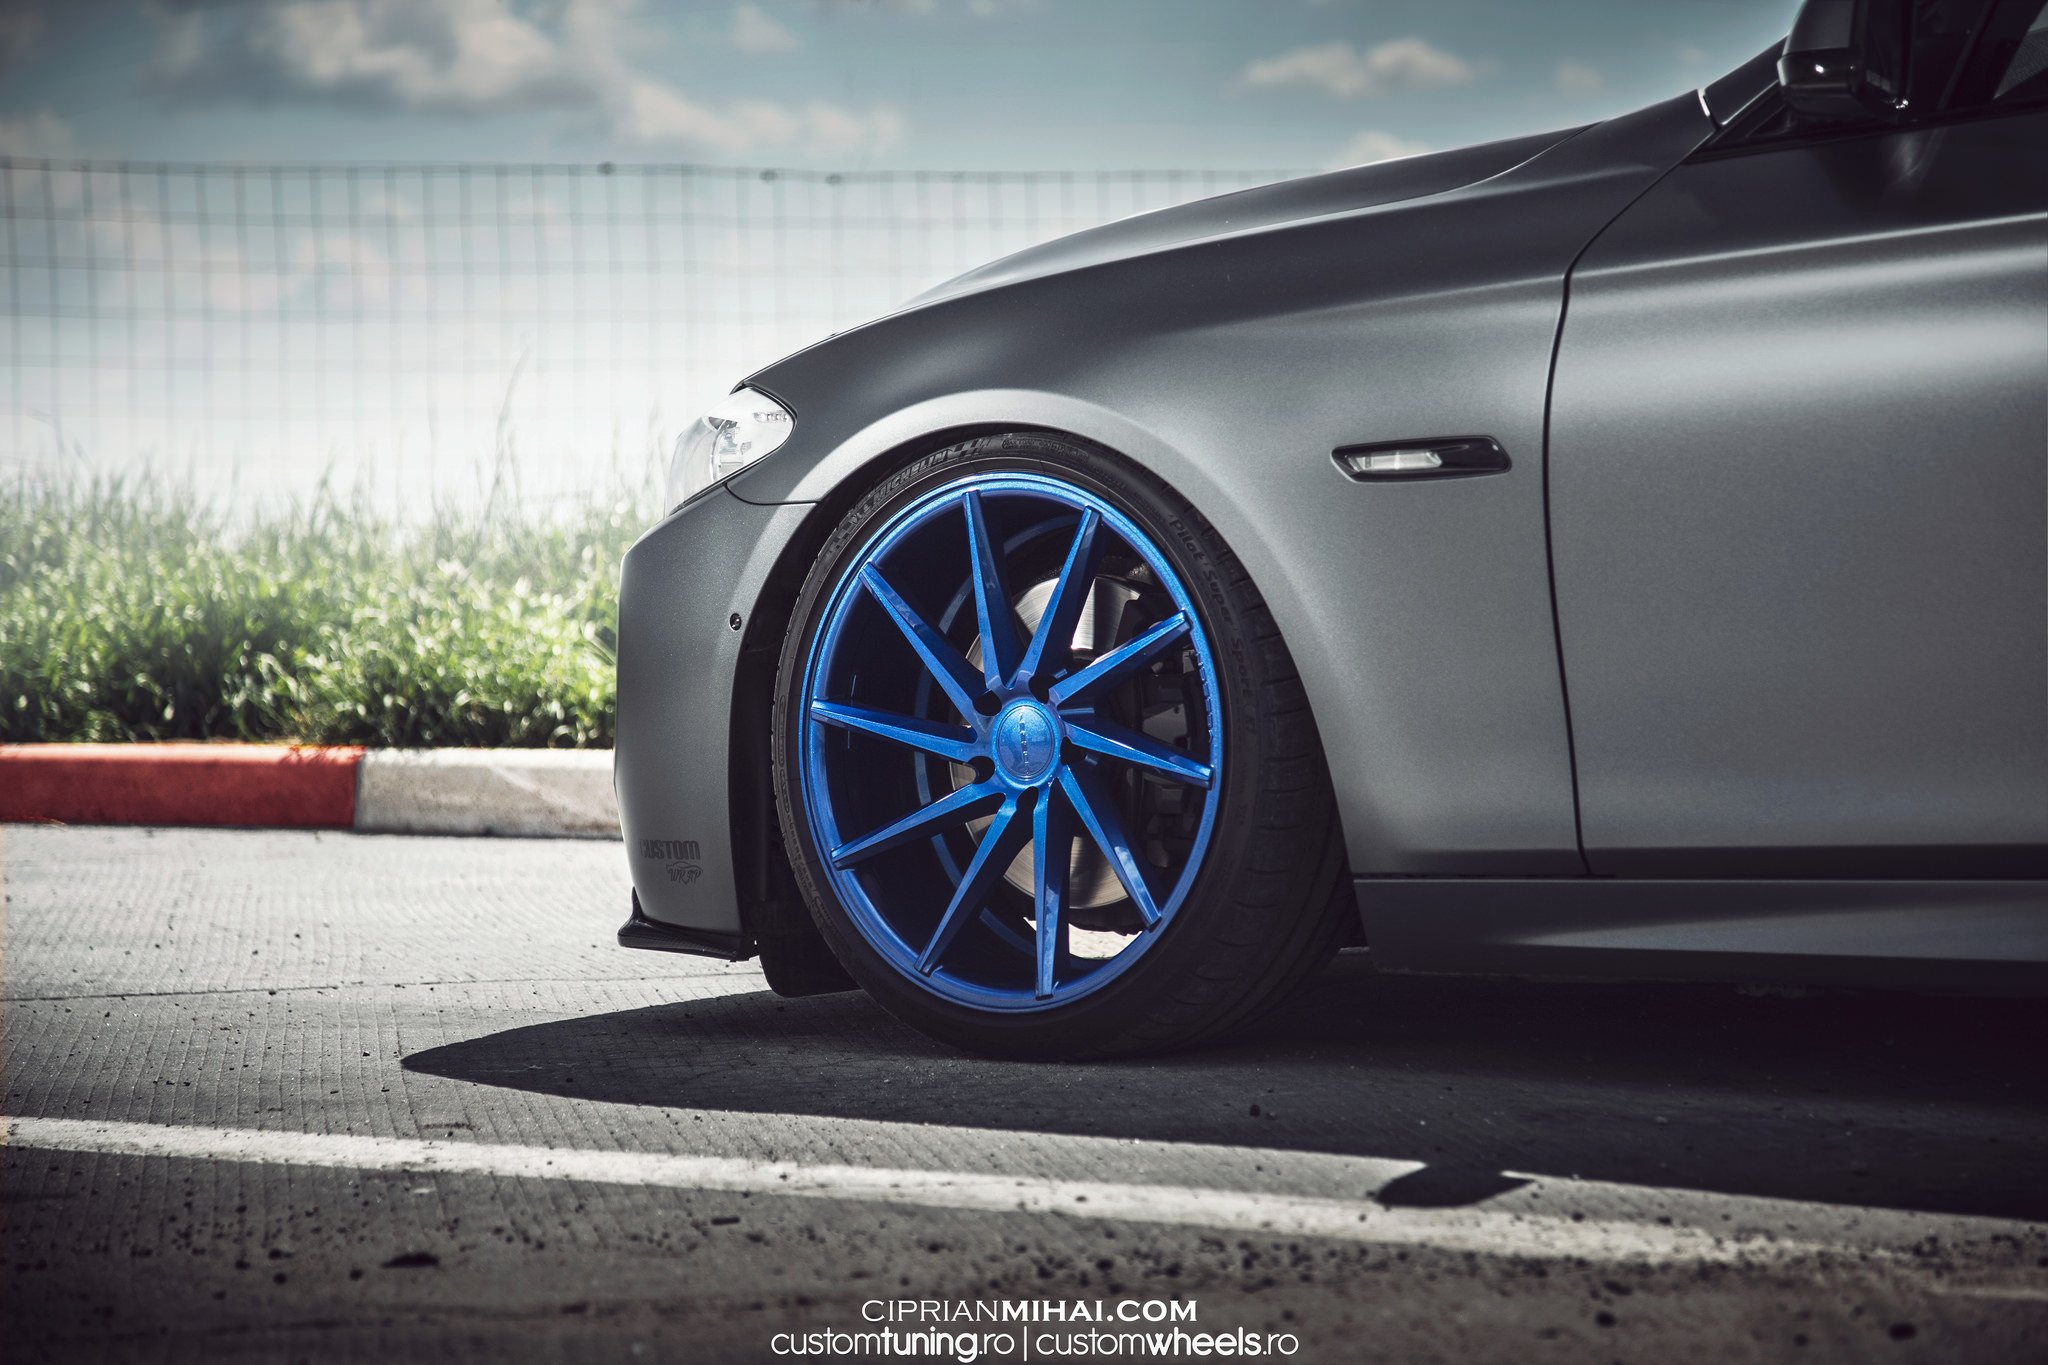 Gray BMW 5-Series on Michelin Tires - Photo by Ciprian Mihai